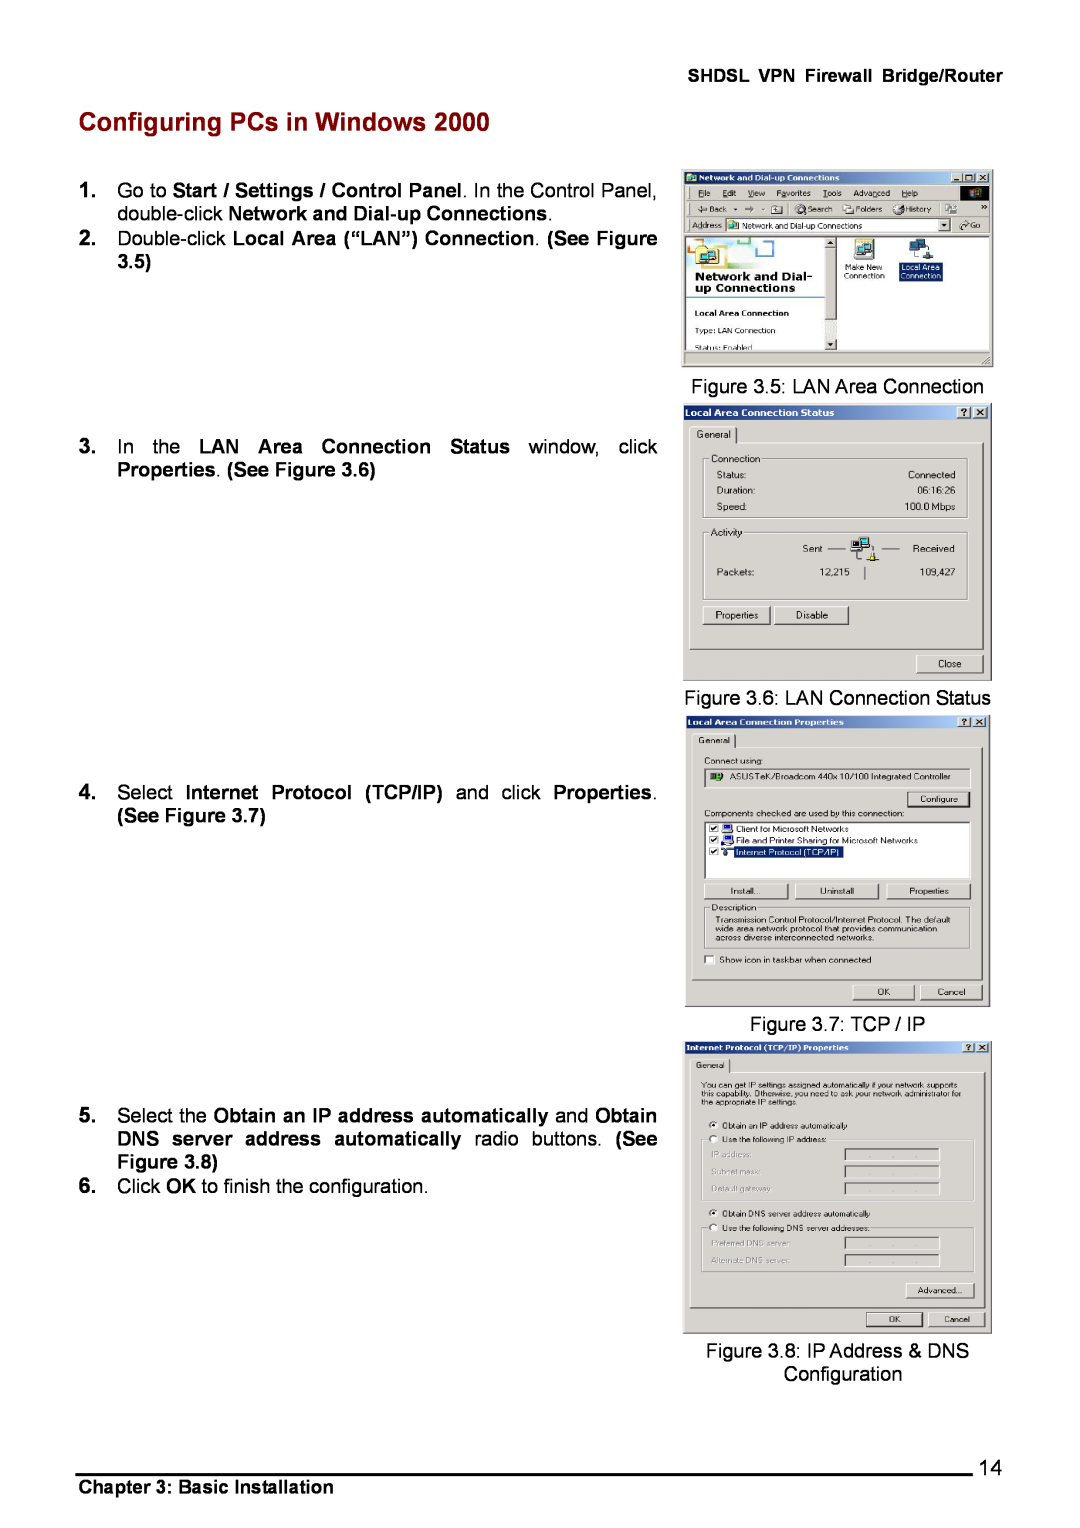 Billion Electric Company 8501 user manual Configuring PCs in Windows, Double-click Local Area “LAN” Connection. See Figure 